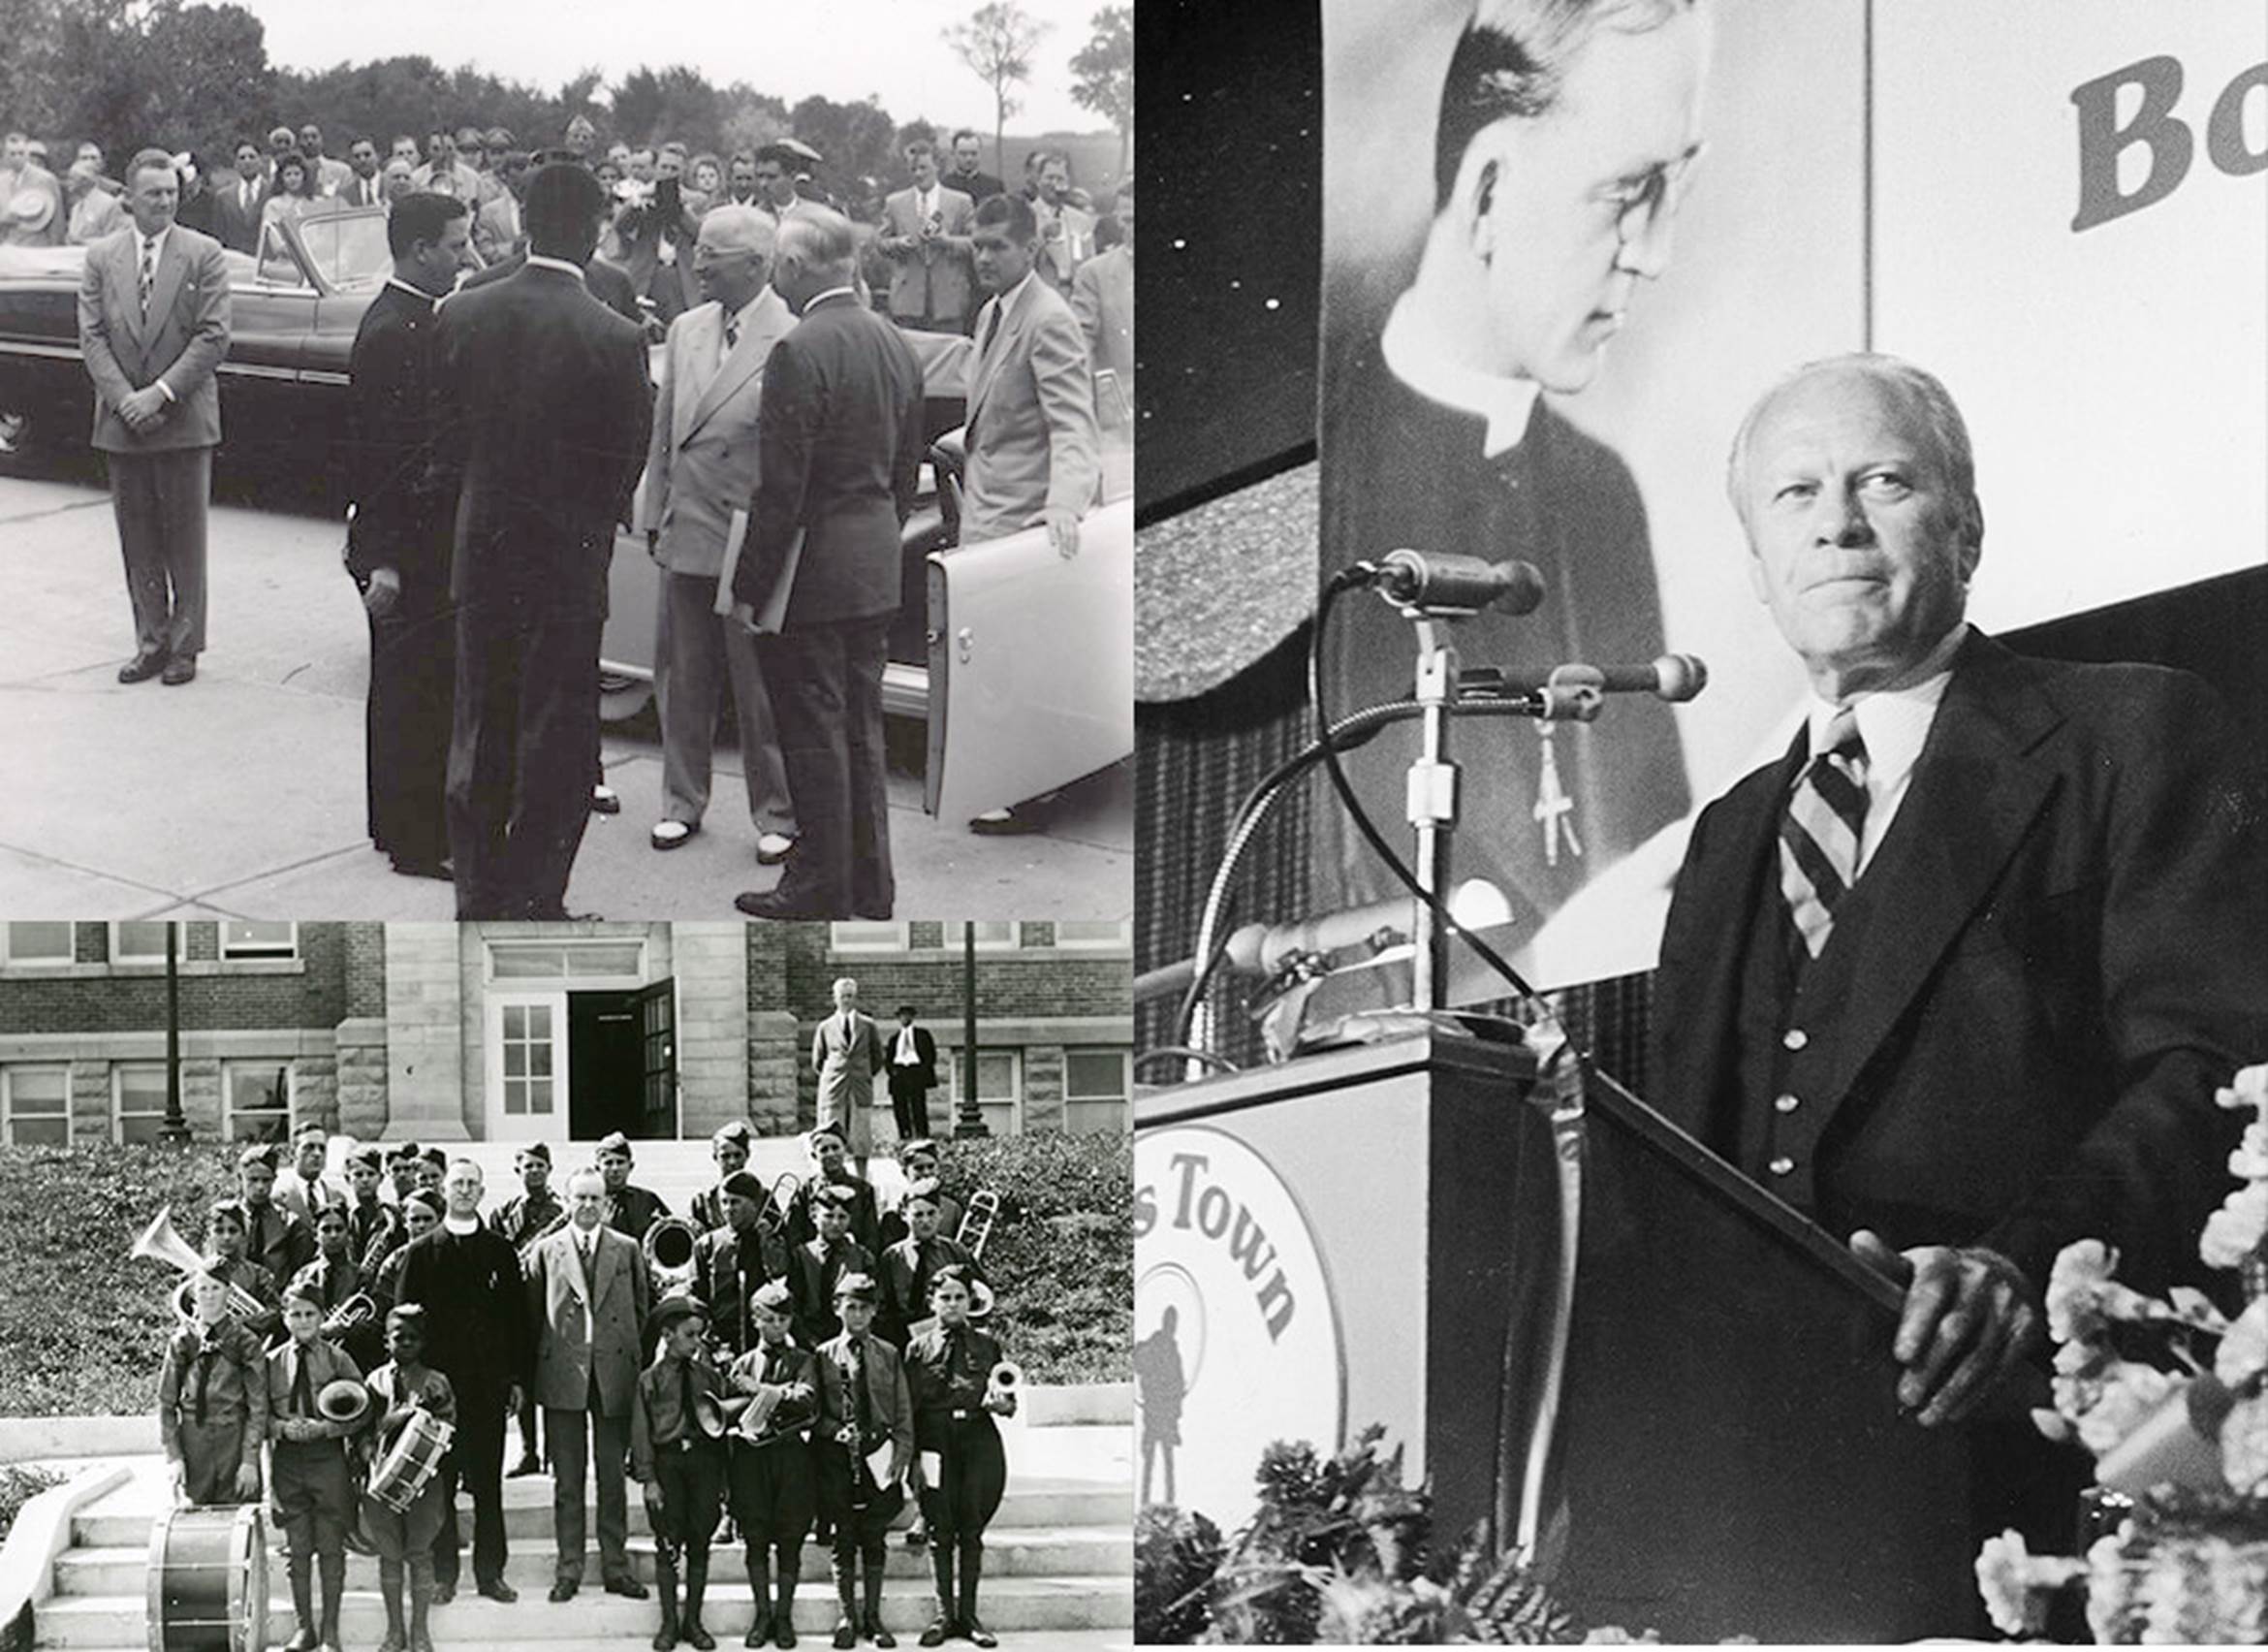 TL:1947- President Truman arriving at Dowd Chapel. <br>BL: 1920's- Boys Town Band with Father Flanagan and President Calvin Coolidge. <br>R: 1978- President Gerald Ford.